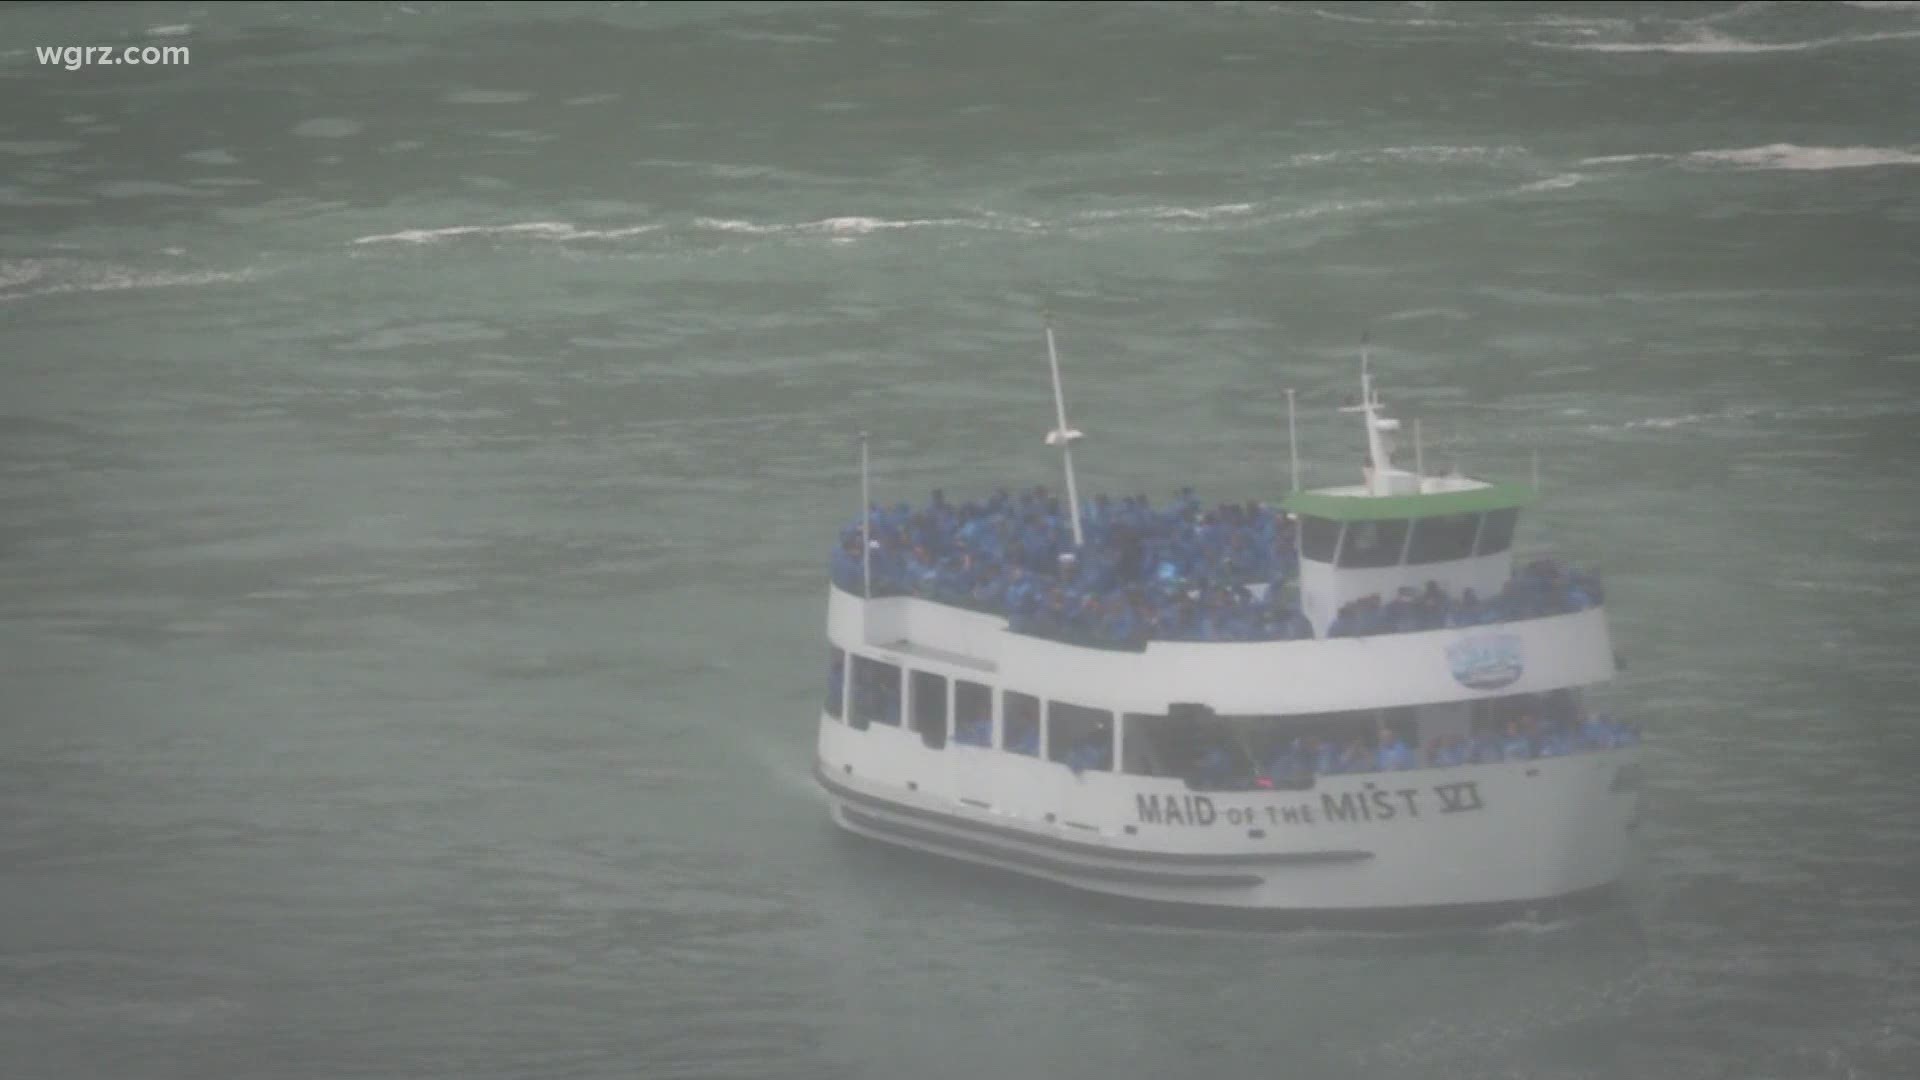 The maid of the mist is back open for visitors.
it's an up-close tour of Niagara Falls. And just like every other business, they have made some changes this summer.